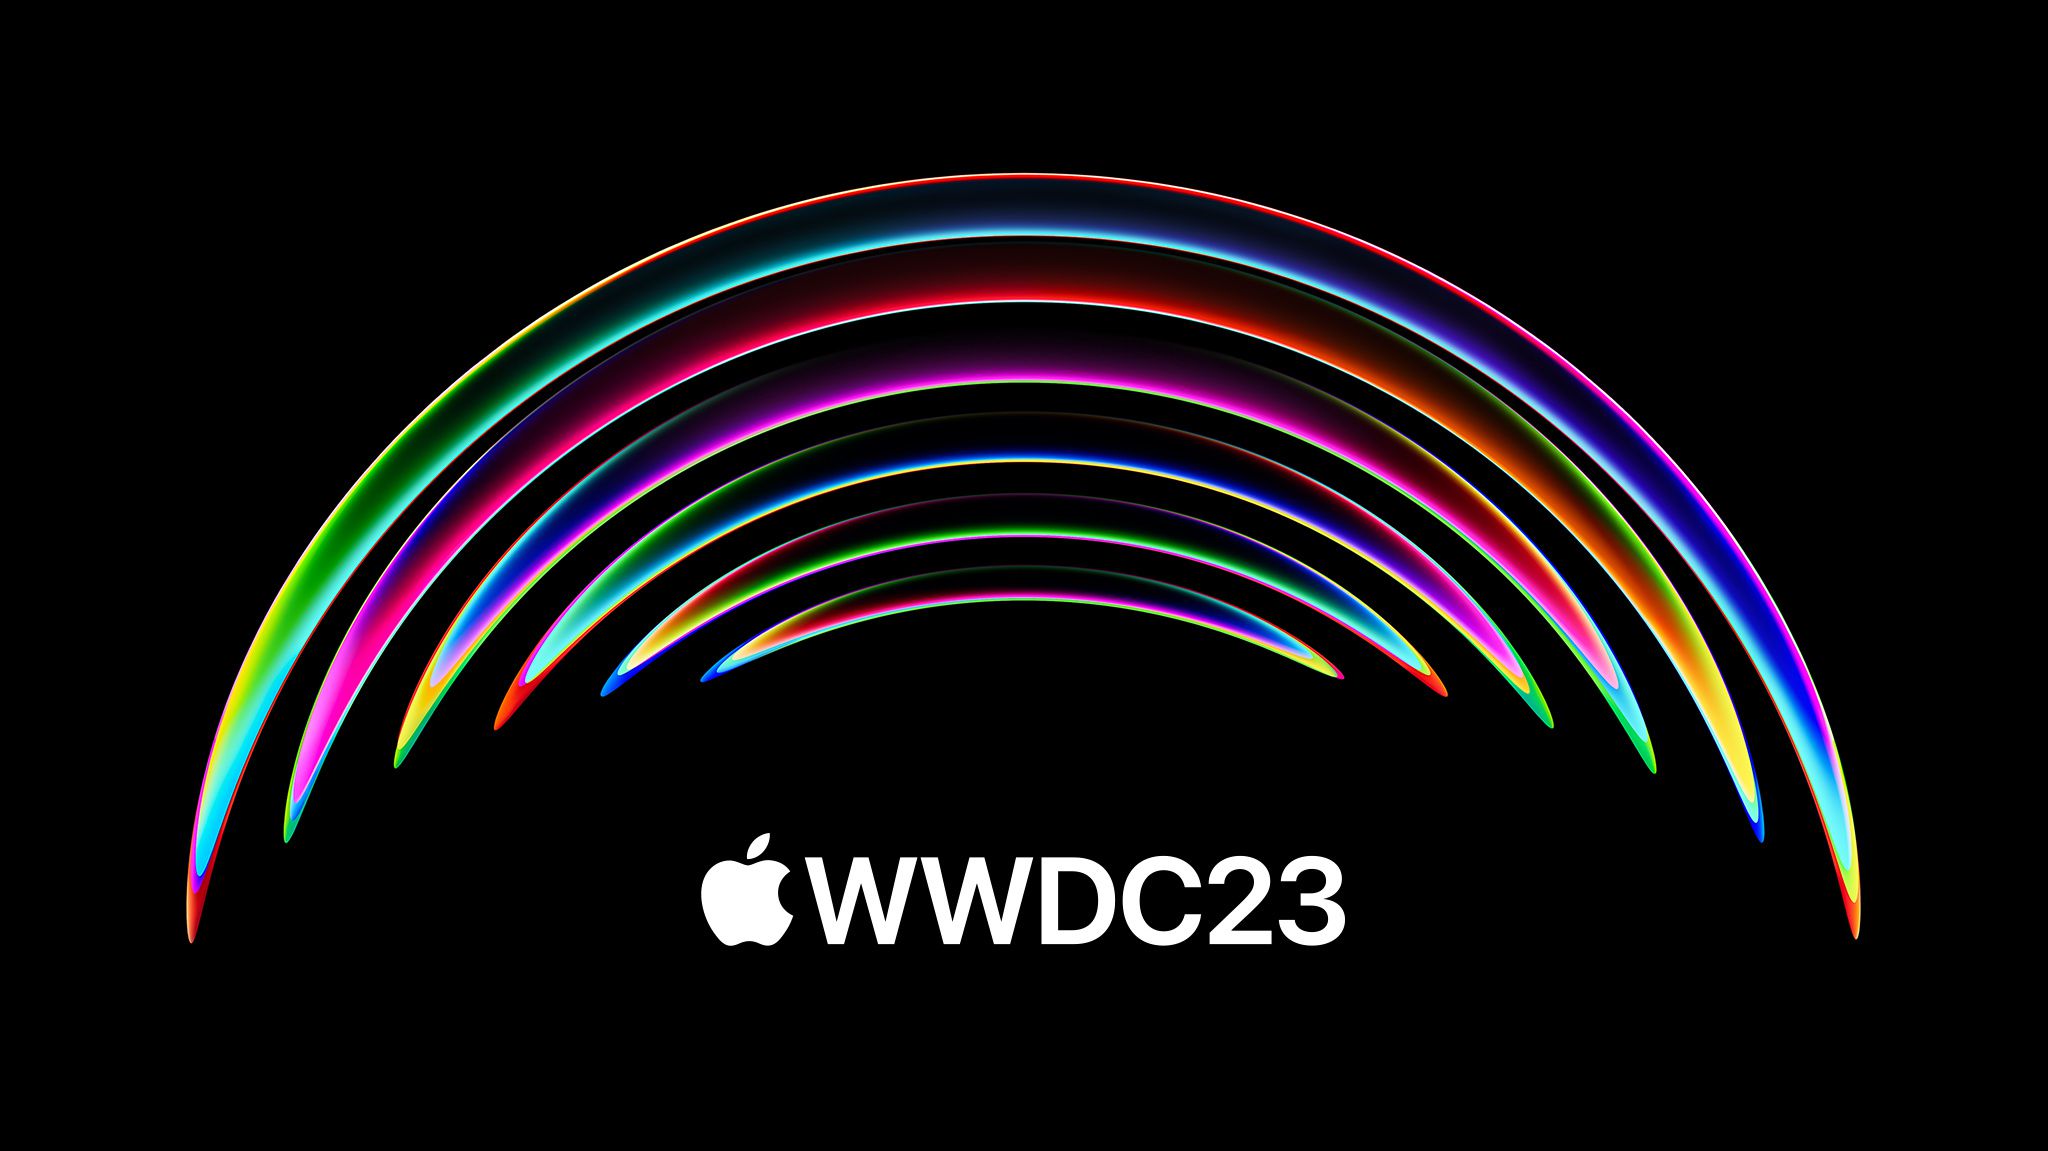 Apple announces the WWDC 2023 schedule including Keynote Time